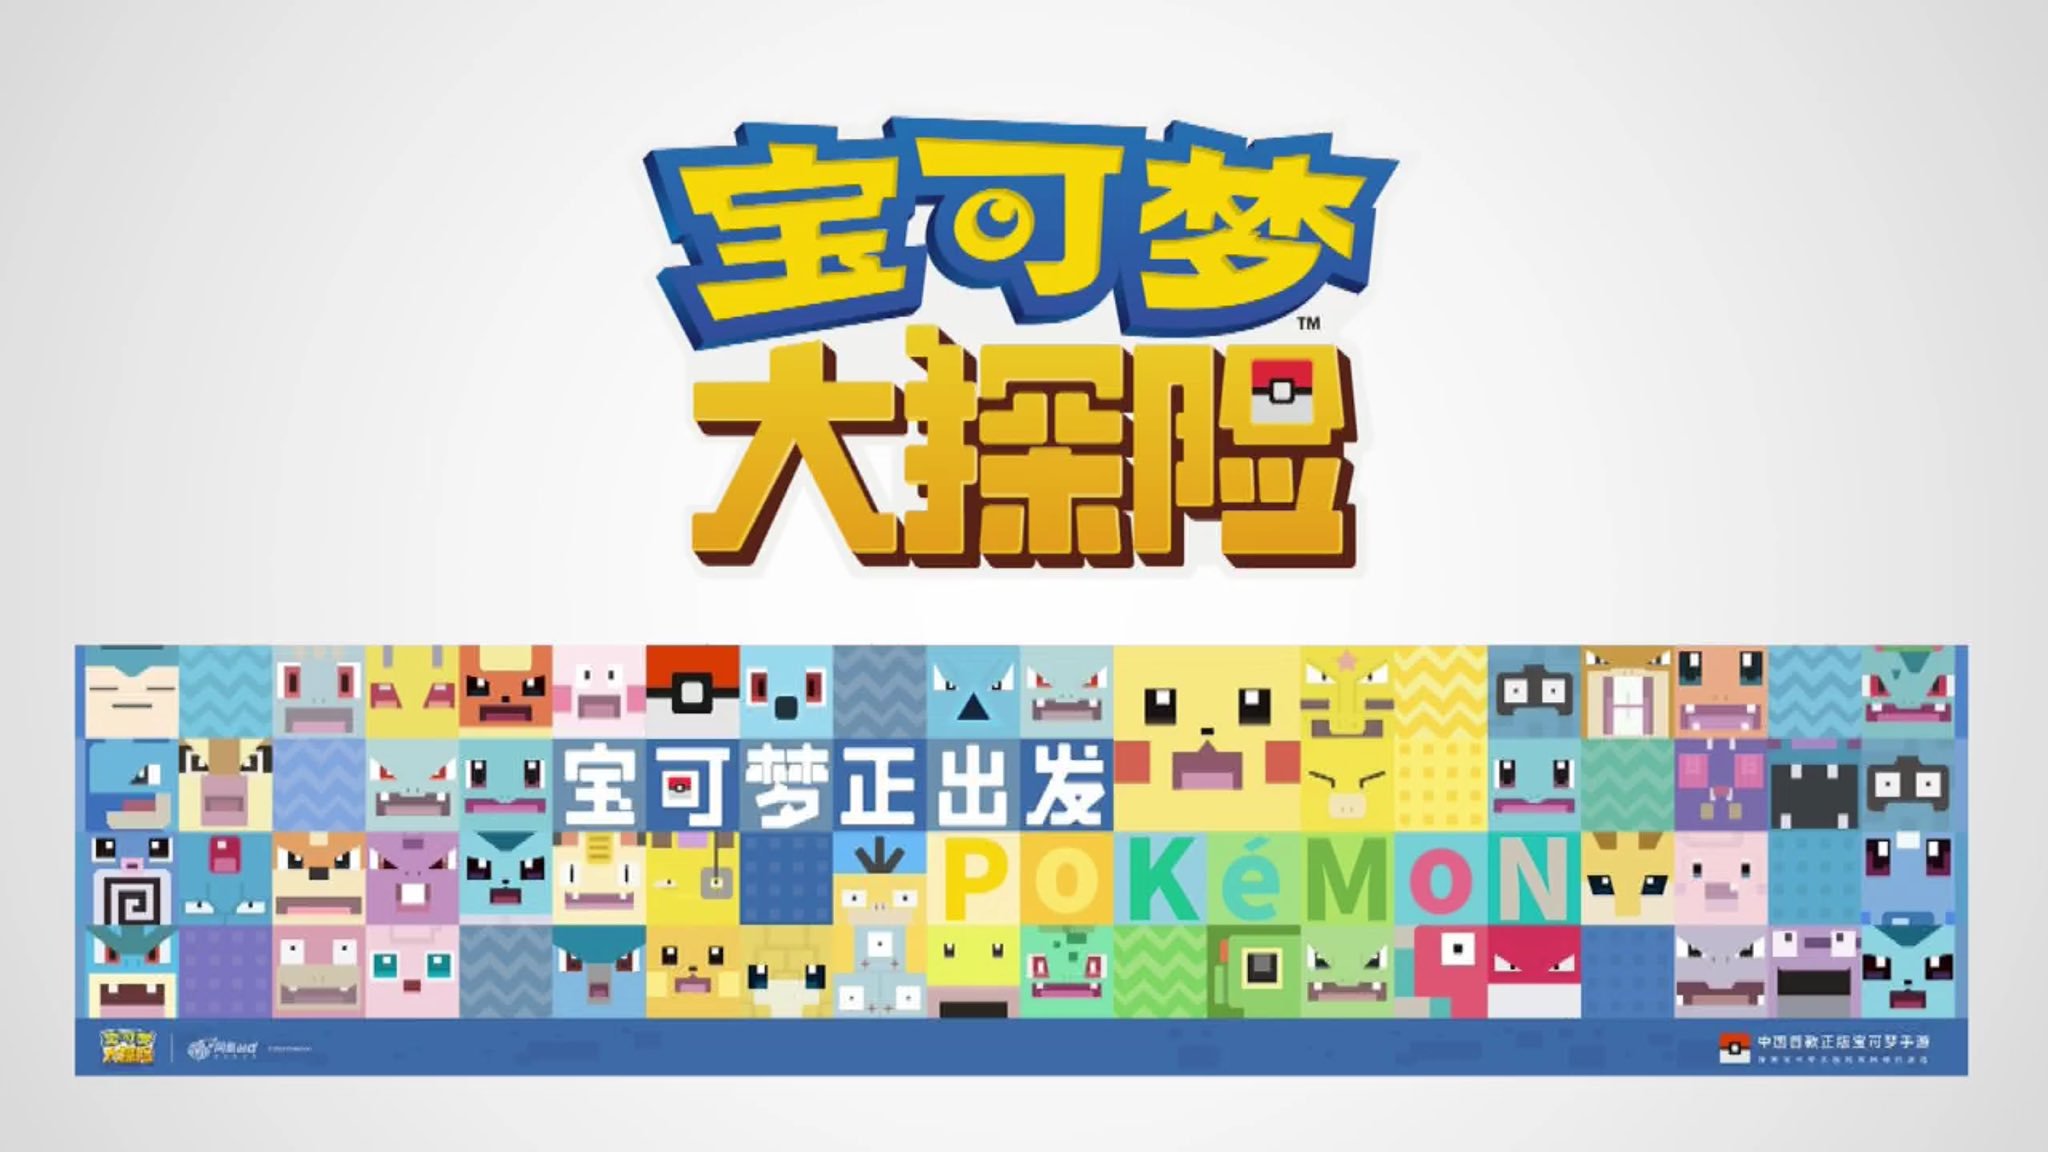 Pokemon Quest China, an upgraded version of Pokemon Quest, was revealed during the latest Pokemon Business Strategy presentation.